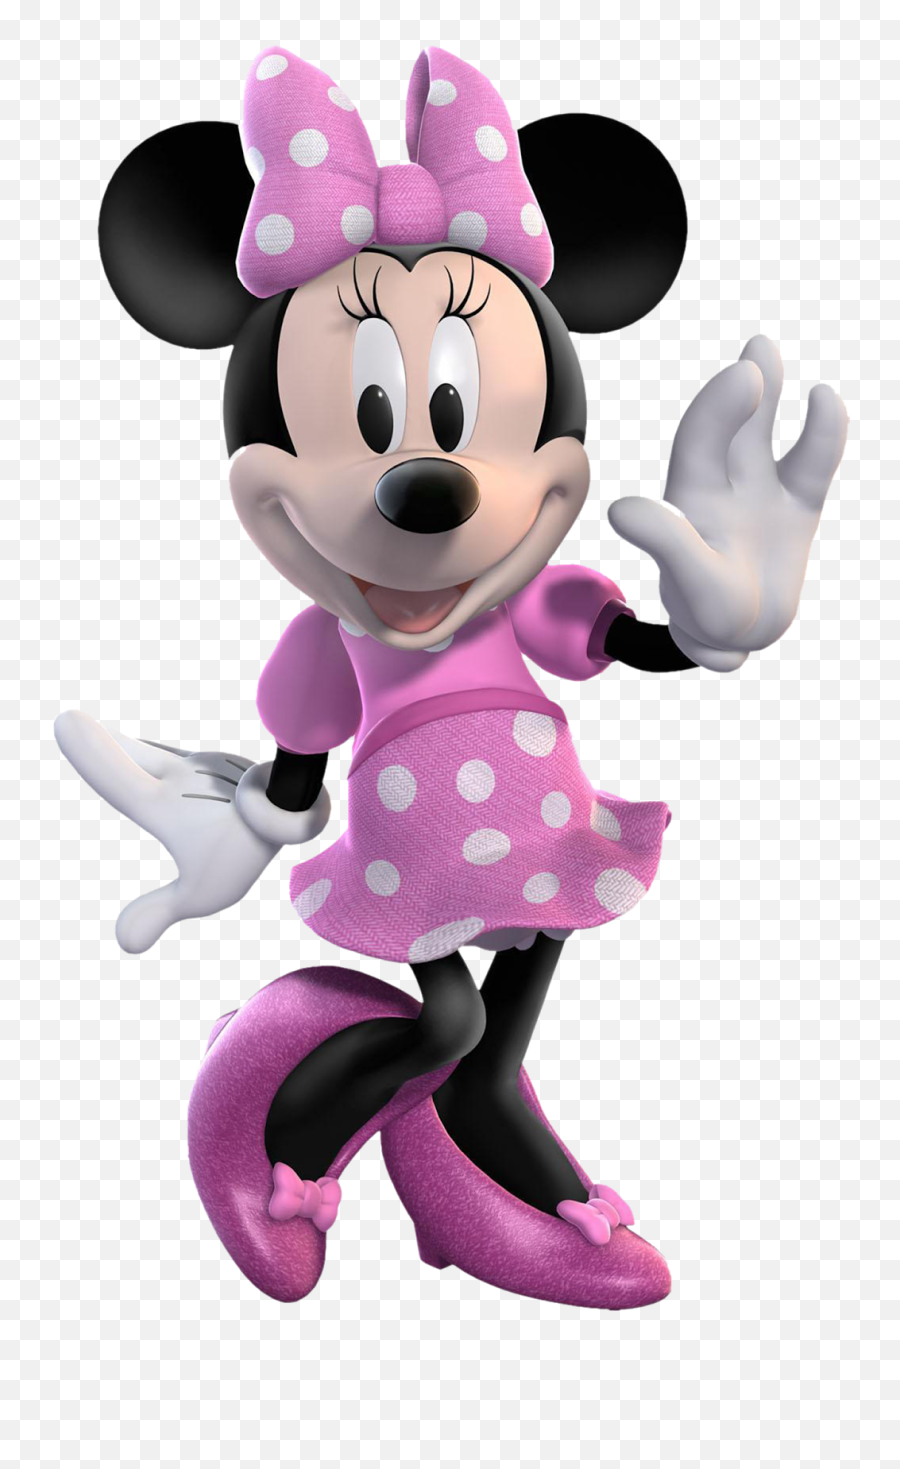 Minnie Png And Vectors For Free Download - Dlpngcom Minnie Mouse Mickey Mouse Clubhouse,Baby Minnie Mouse Png